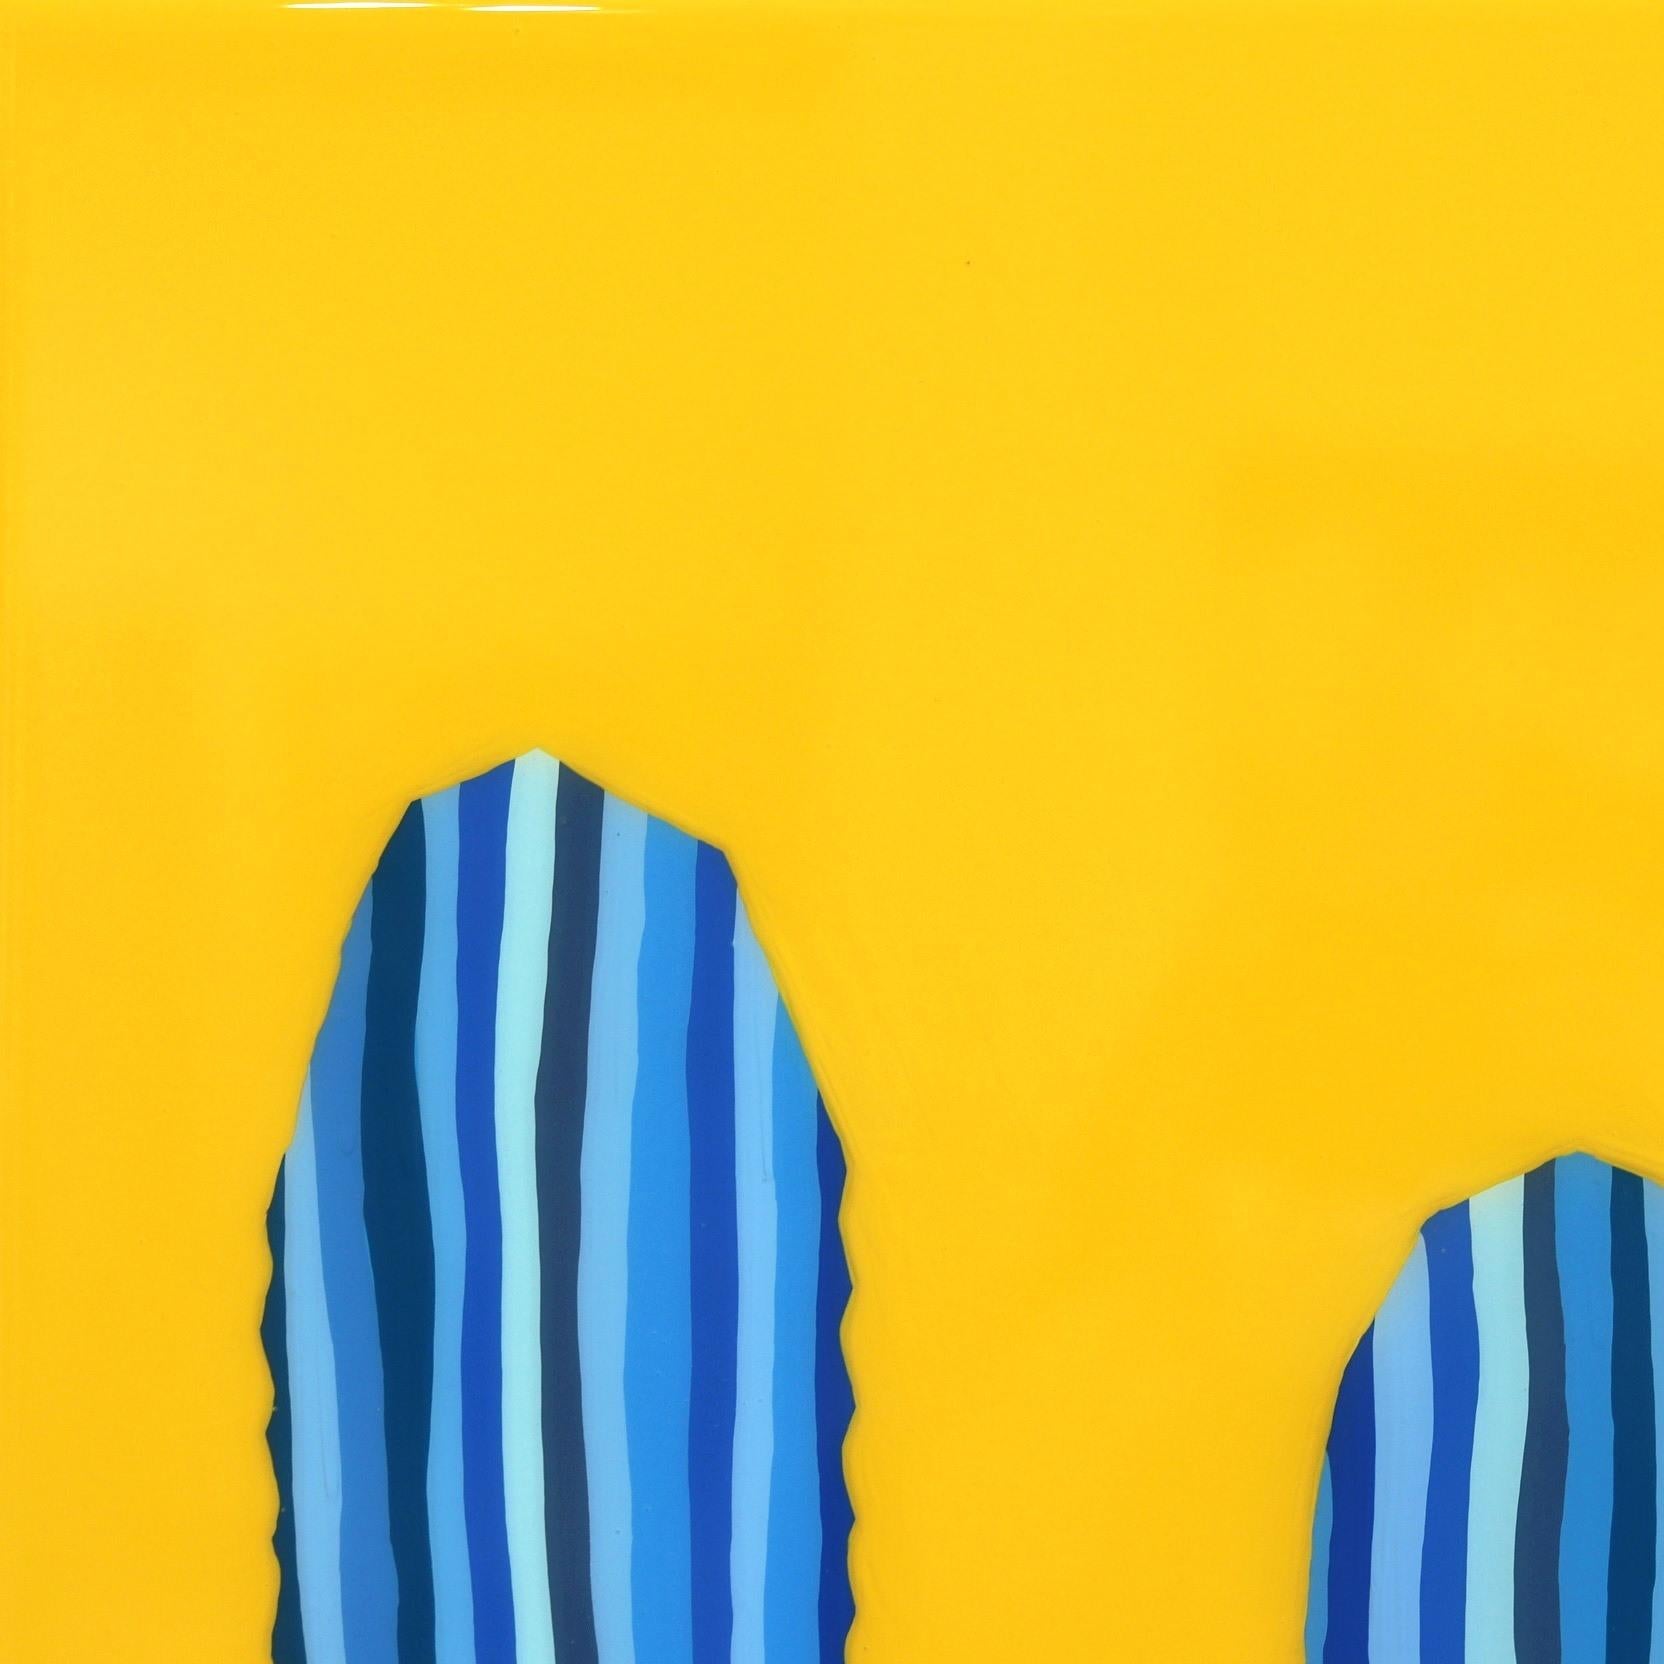 Mañana Amarilla- Vibrant Yellow Blue Southwest Inspired Pop Art Cactus Painting - Orange Abstract Painting by Will Beger